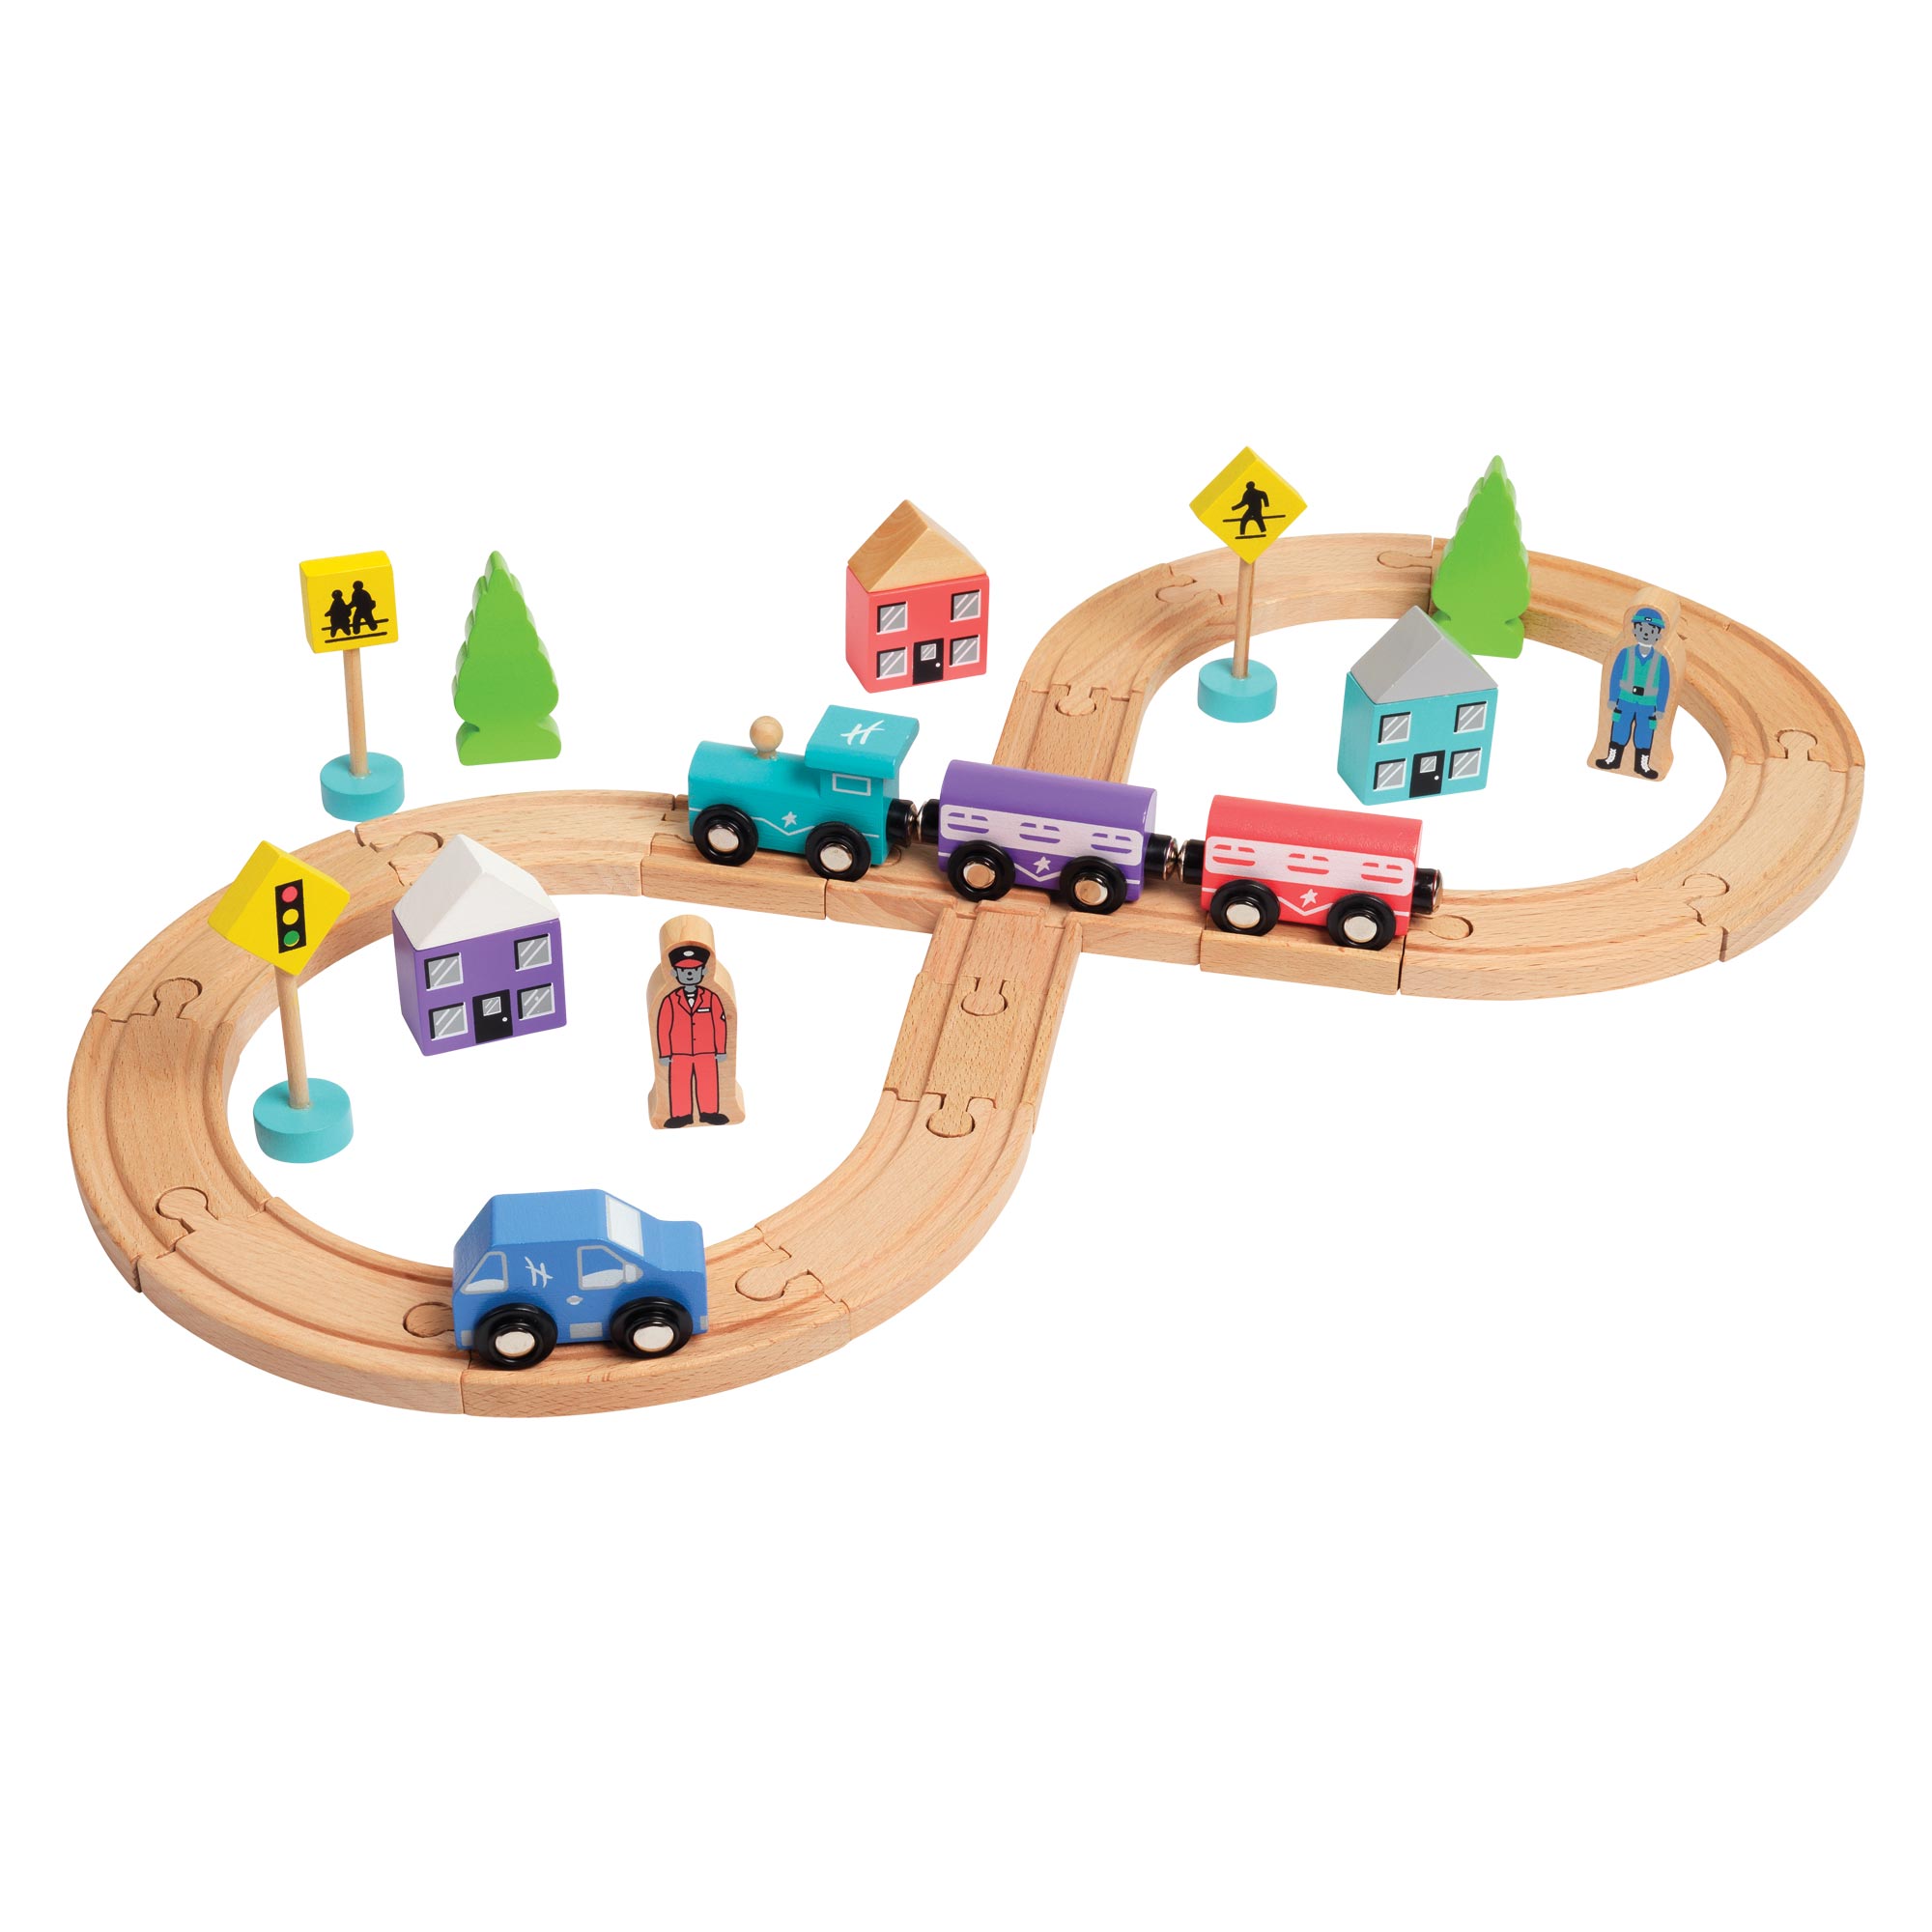 Top 10 cheapest Wooden train set prices - best UK deals on 